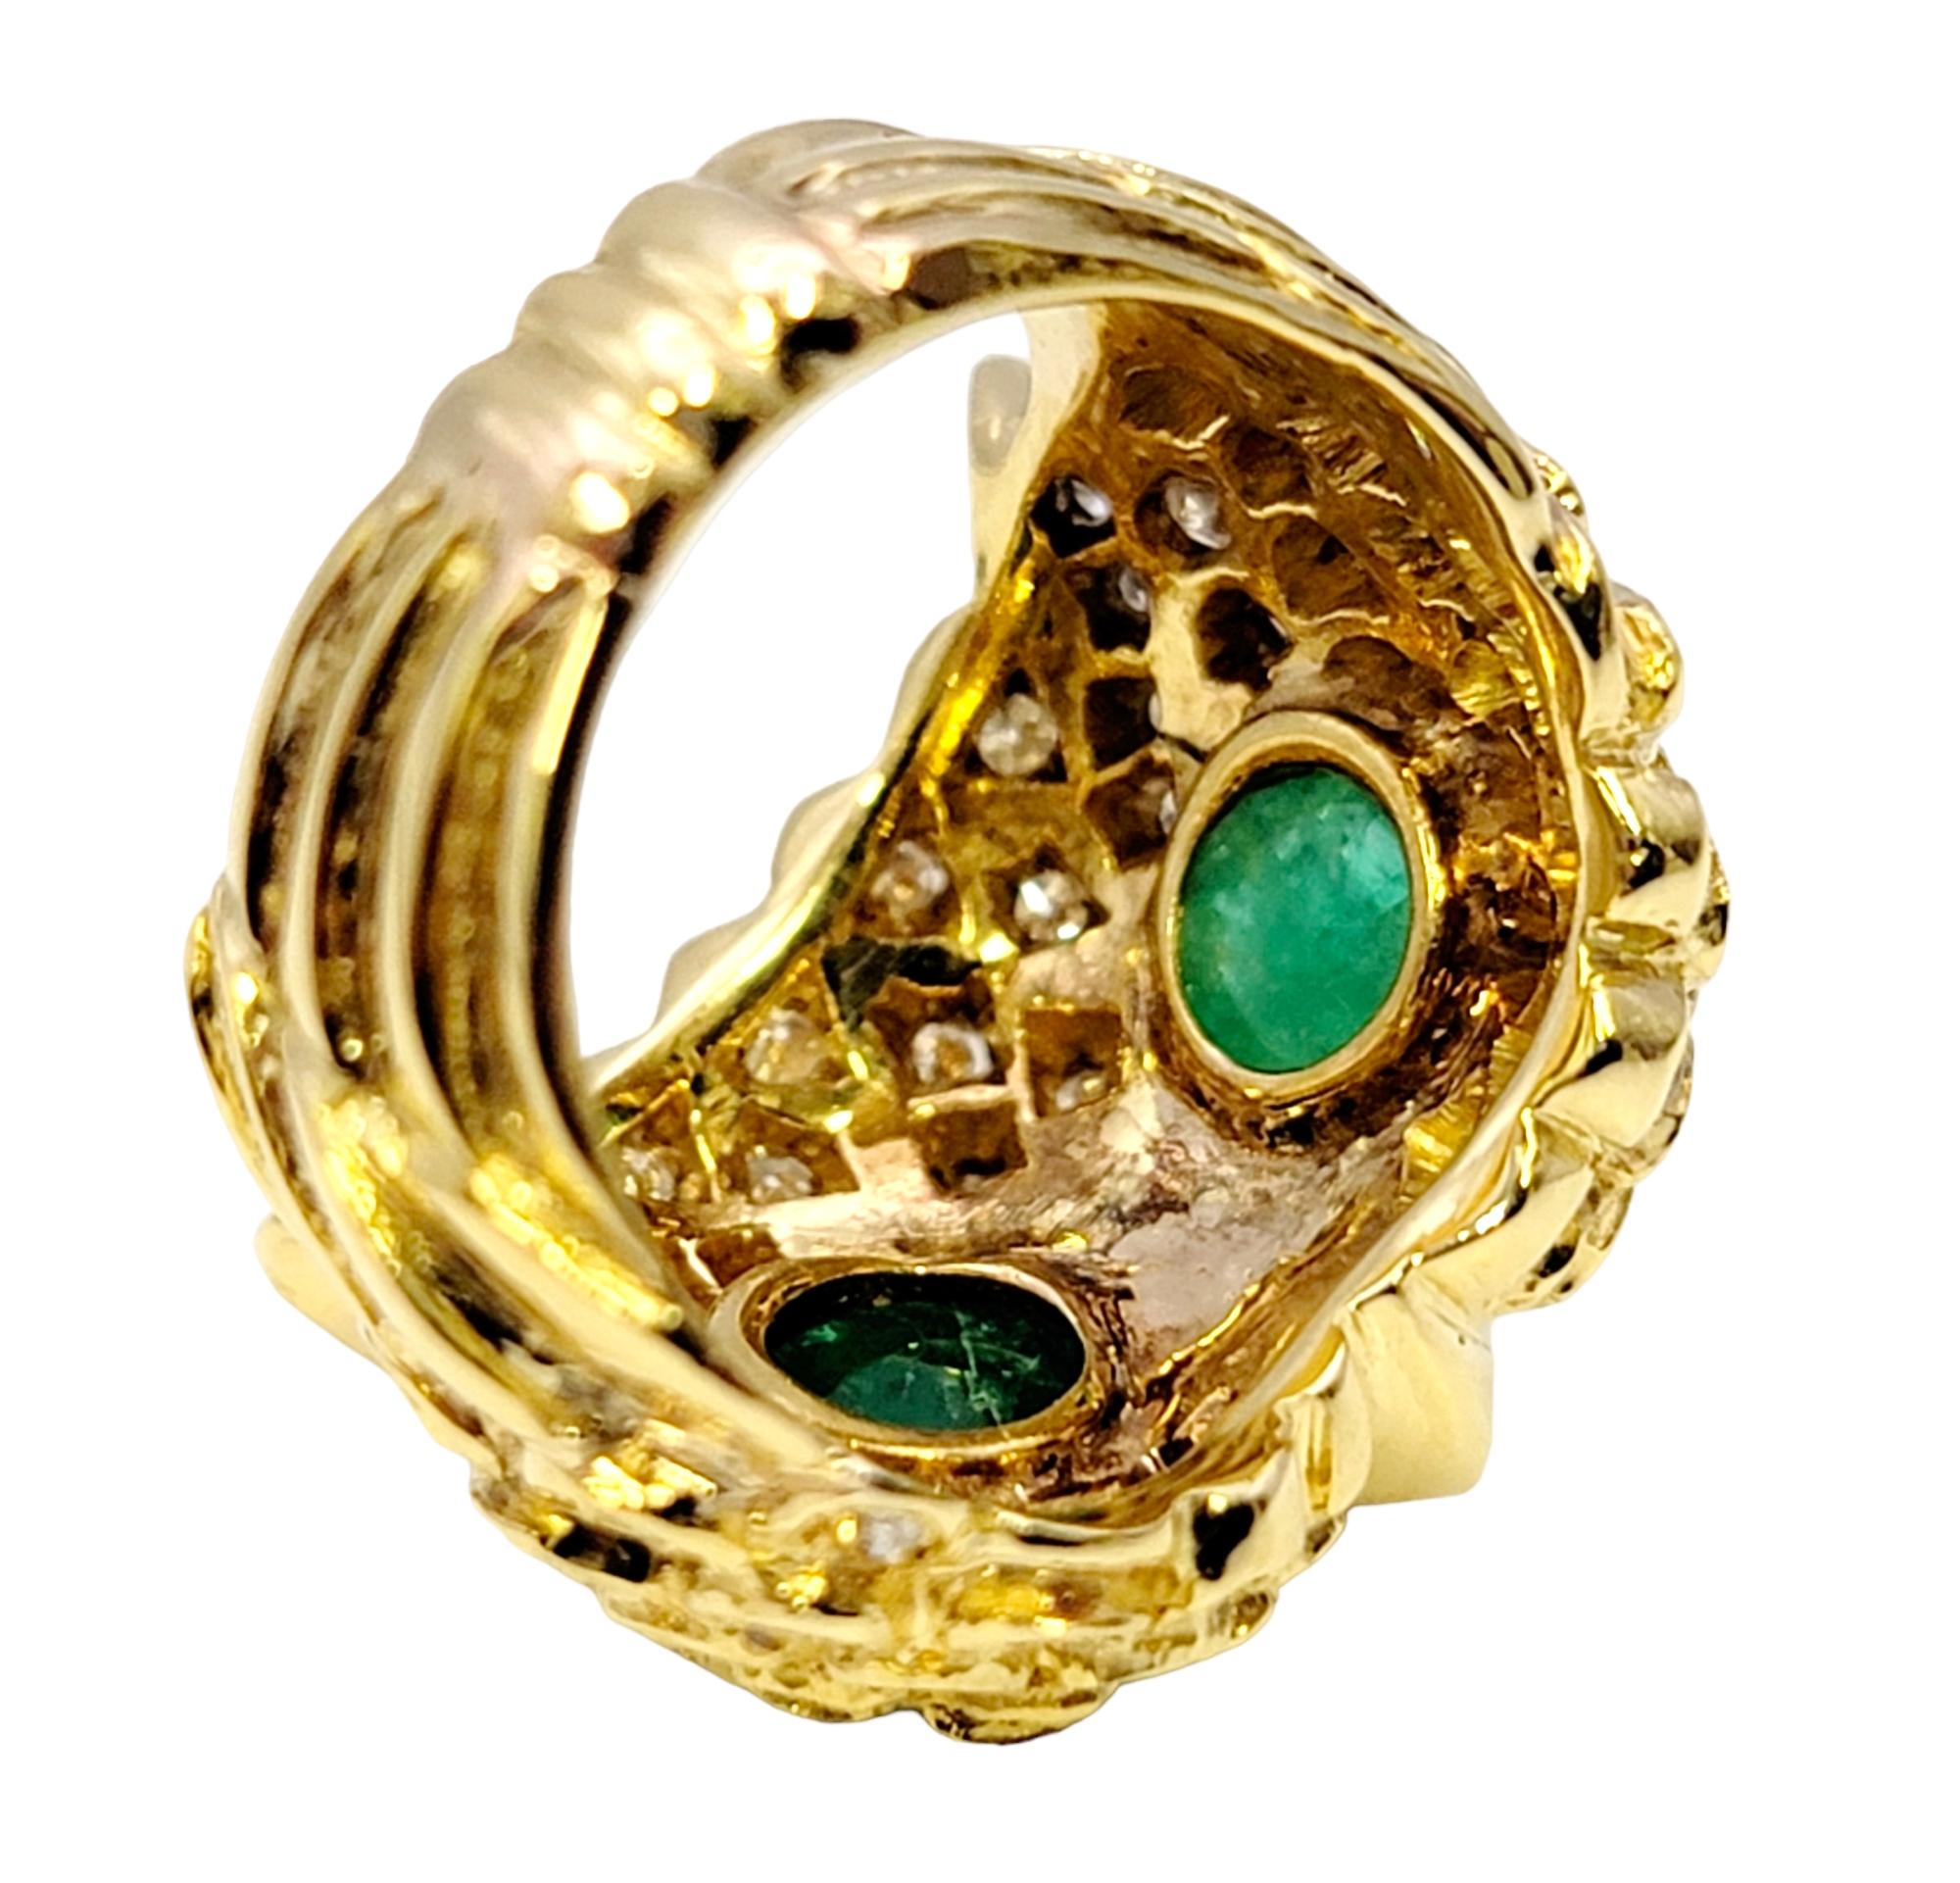 Diamond Embellished Owl Ring with Cabochon Emerald Eyes in 14 Karat Yellow Gold For Sale 2